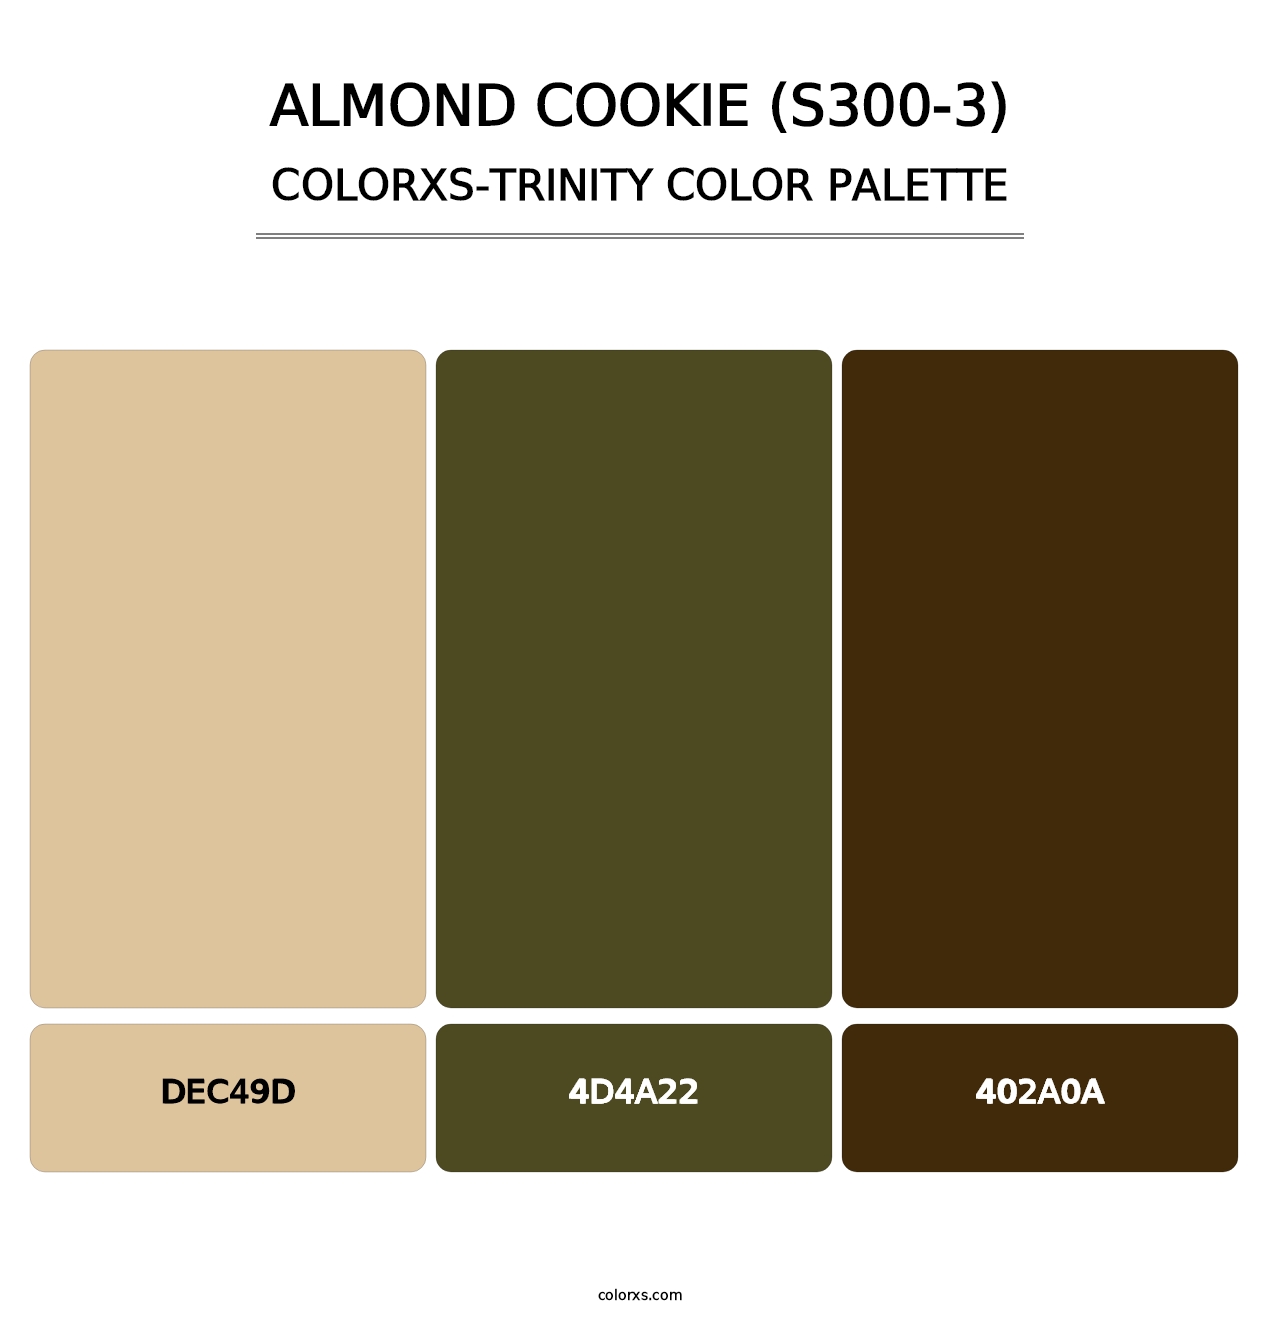 Almond Cookie (S300-3) - Colorxs Trinity Palette